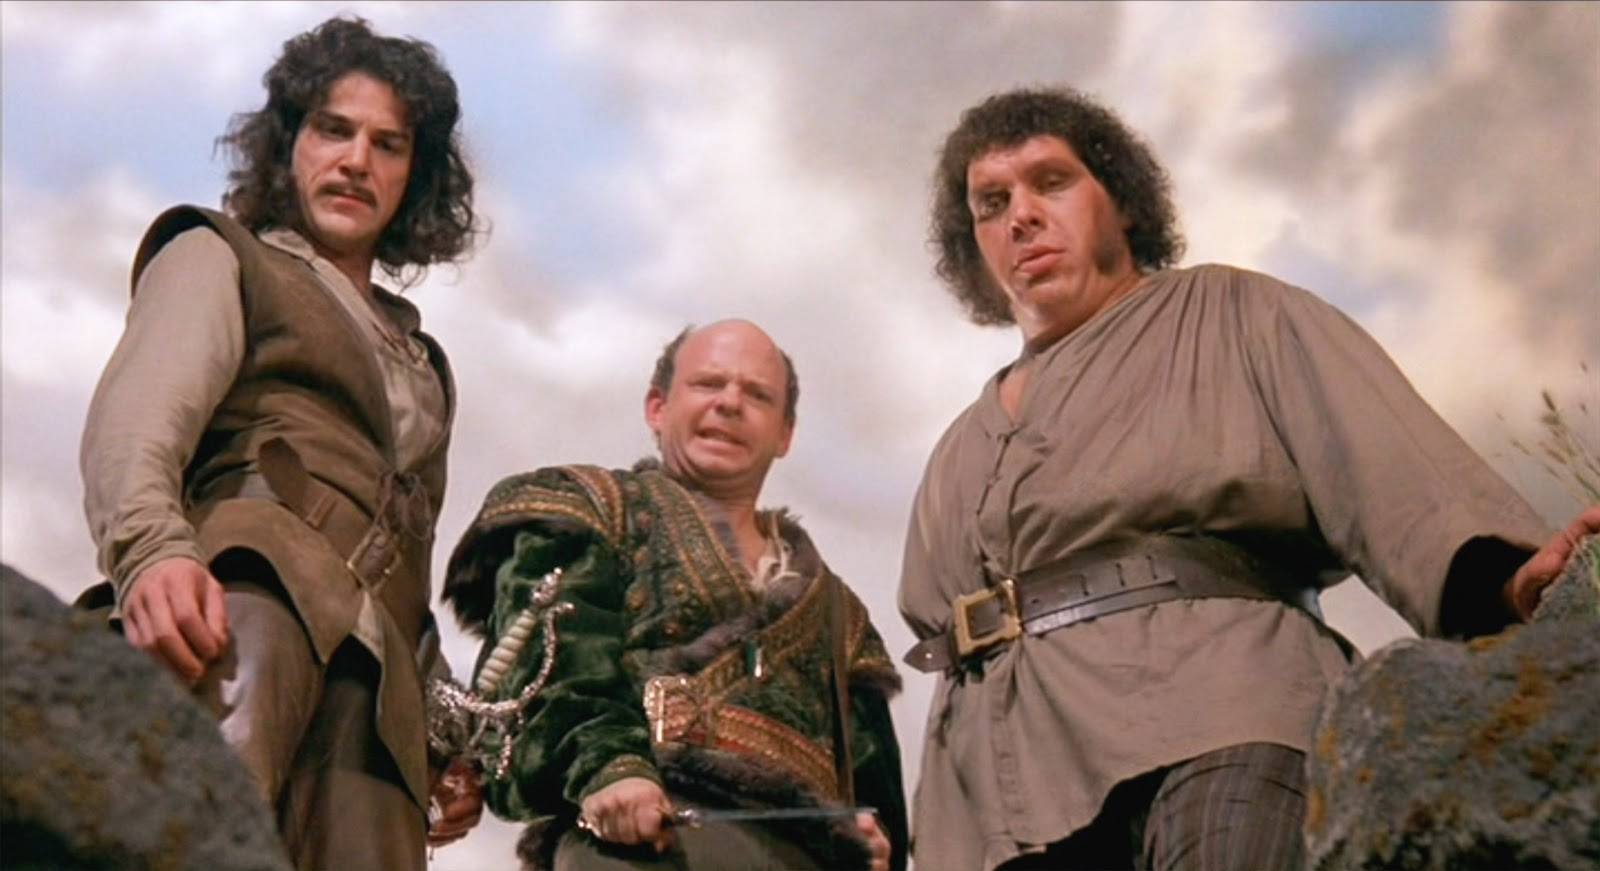 A Princess Bride Game is Available for iOS (but You Can’t Match Wits with a Sicilian)